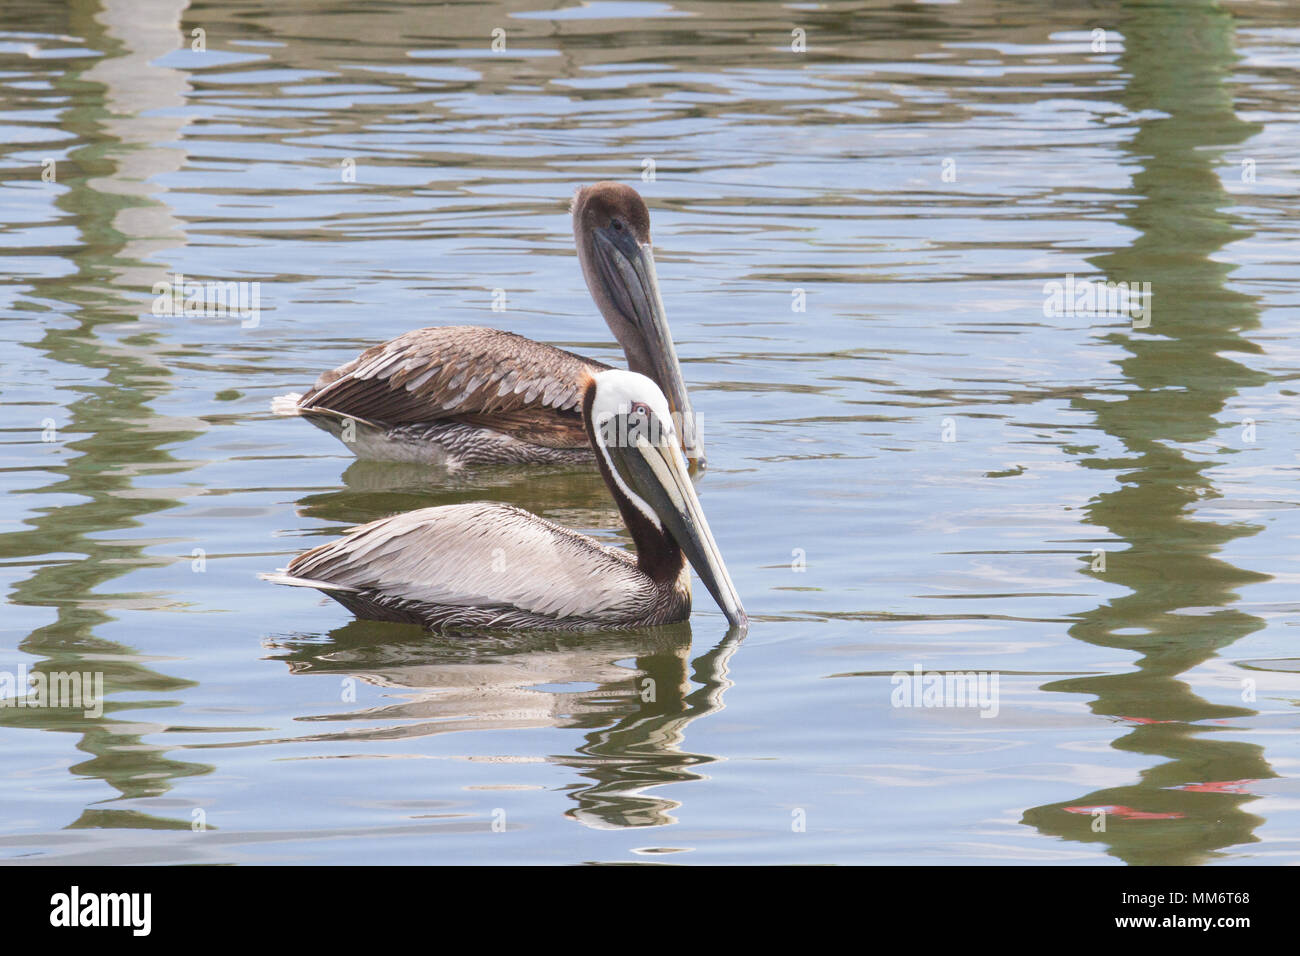 A breeding pair of brown pelicans on the water. Stock Photo